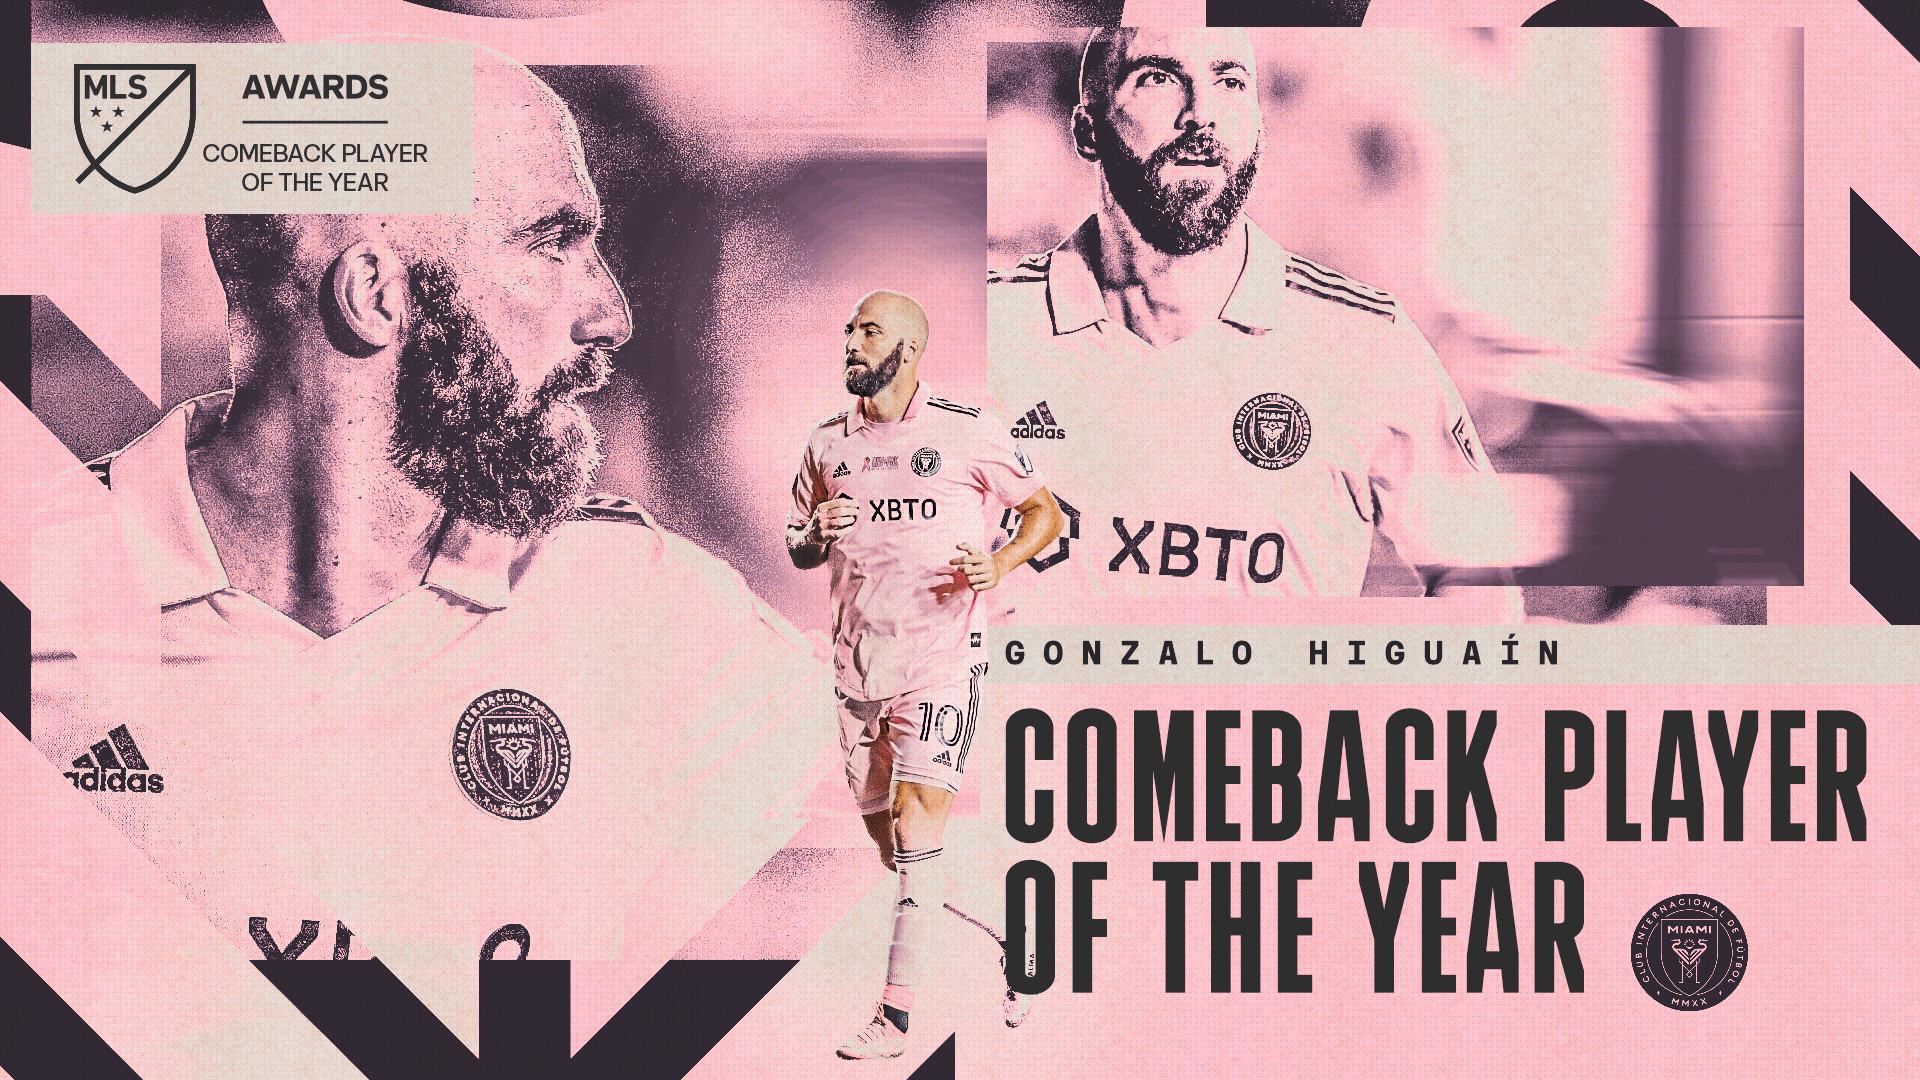 Inter Miami's Gonzalo Higuain named 2022 MLS Comeback Player of the Year | MLSSoccer.com thumbnail